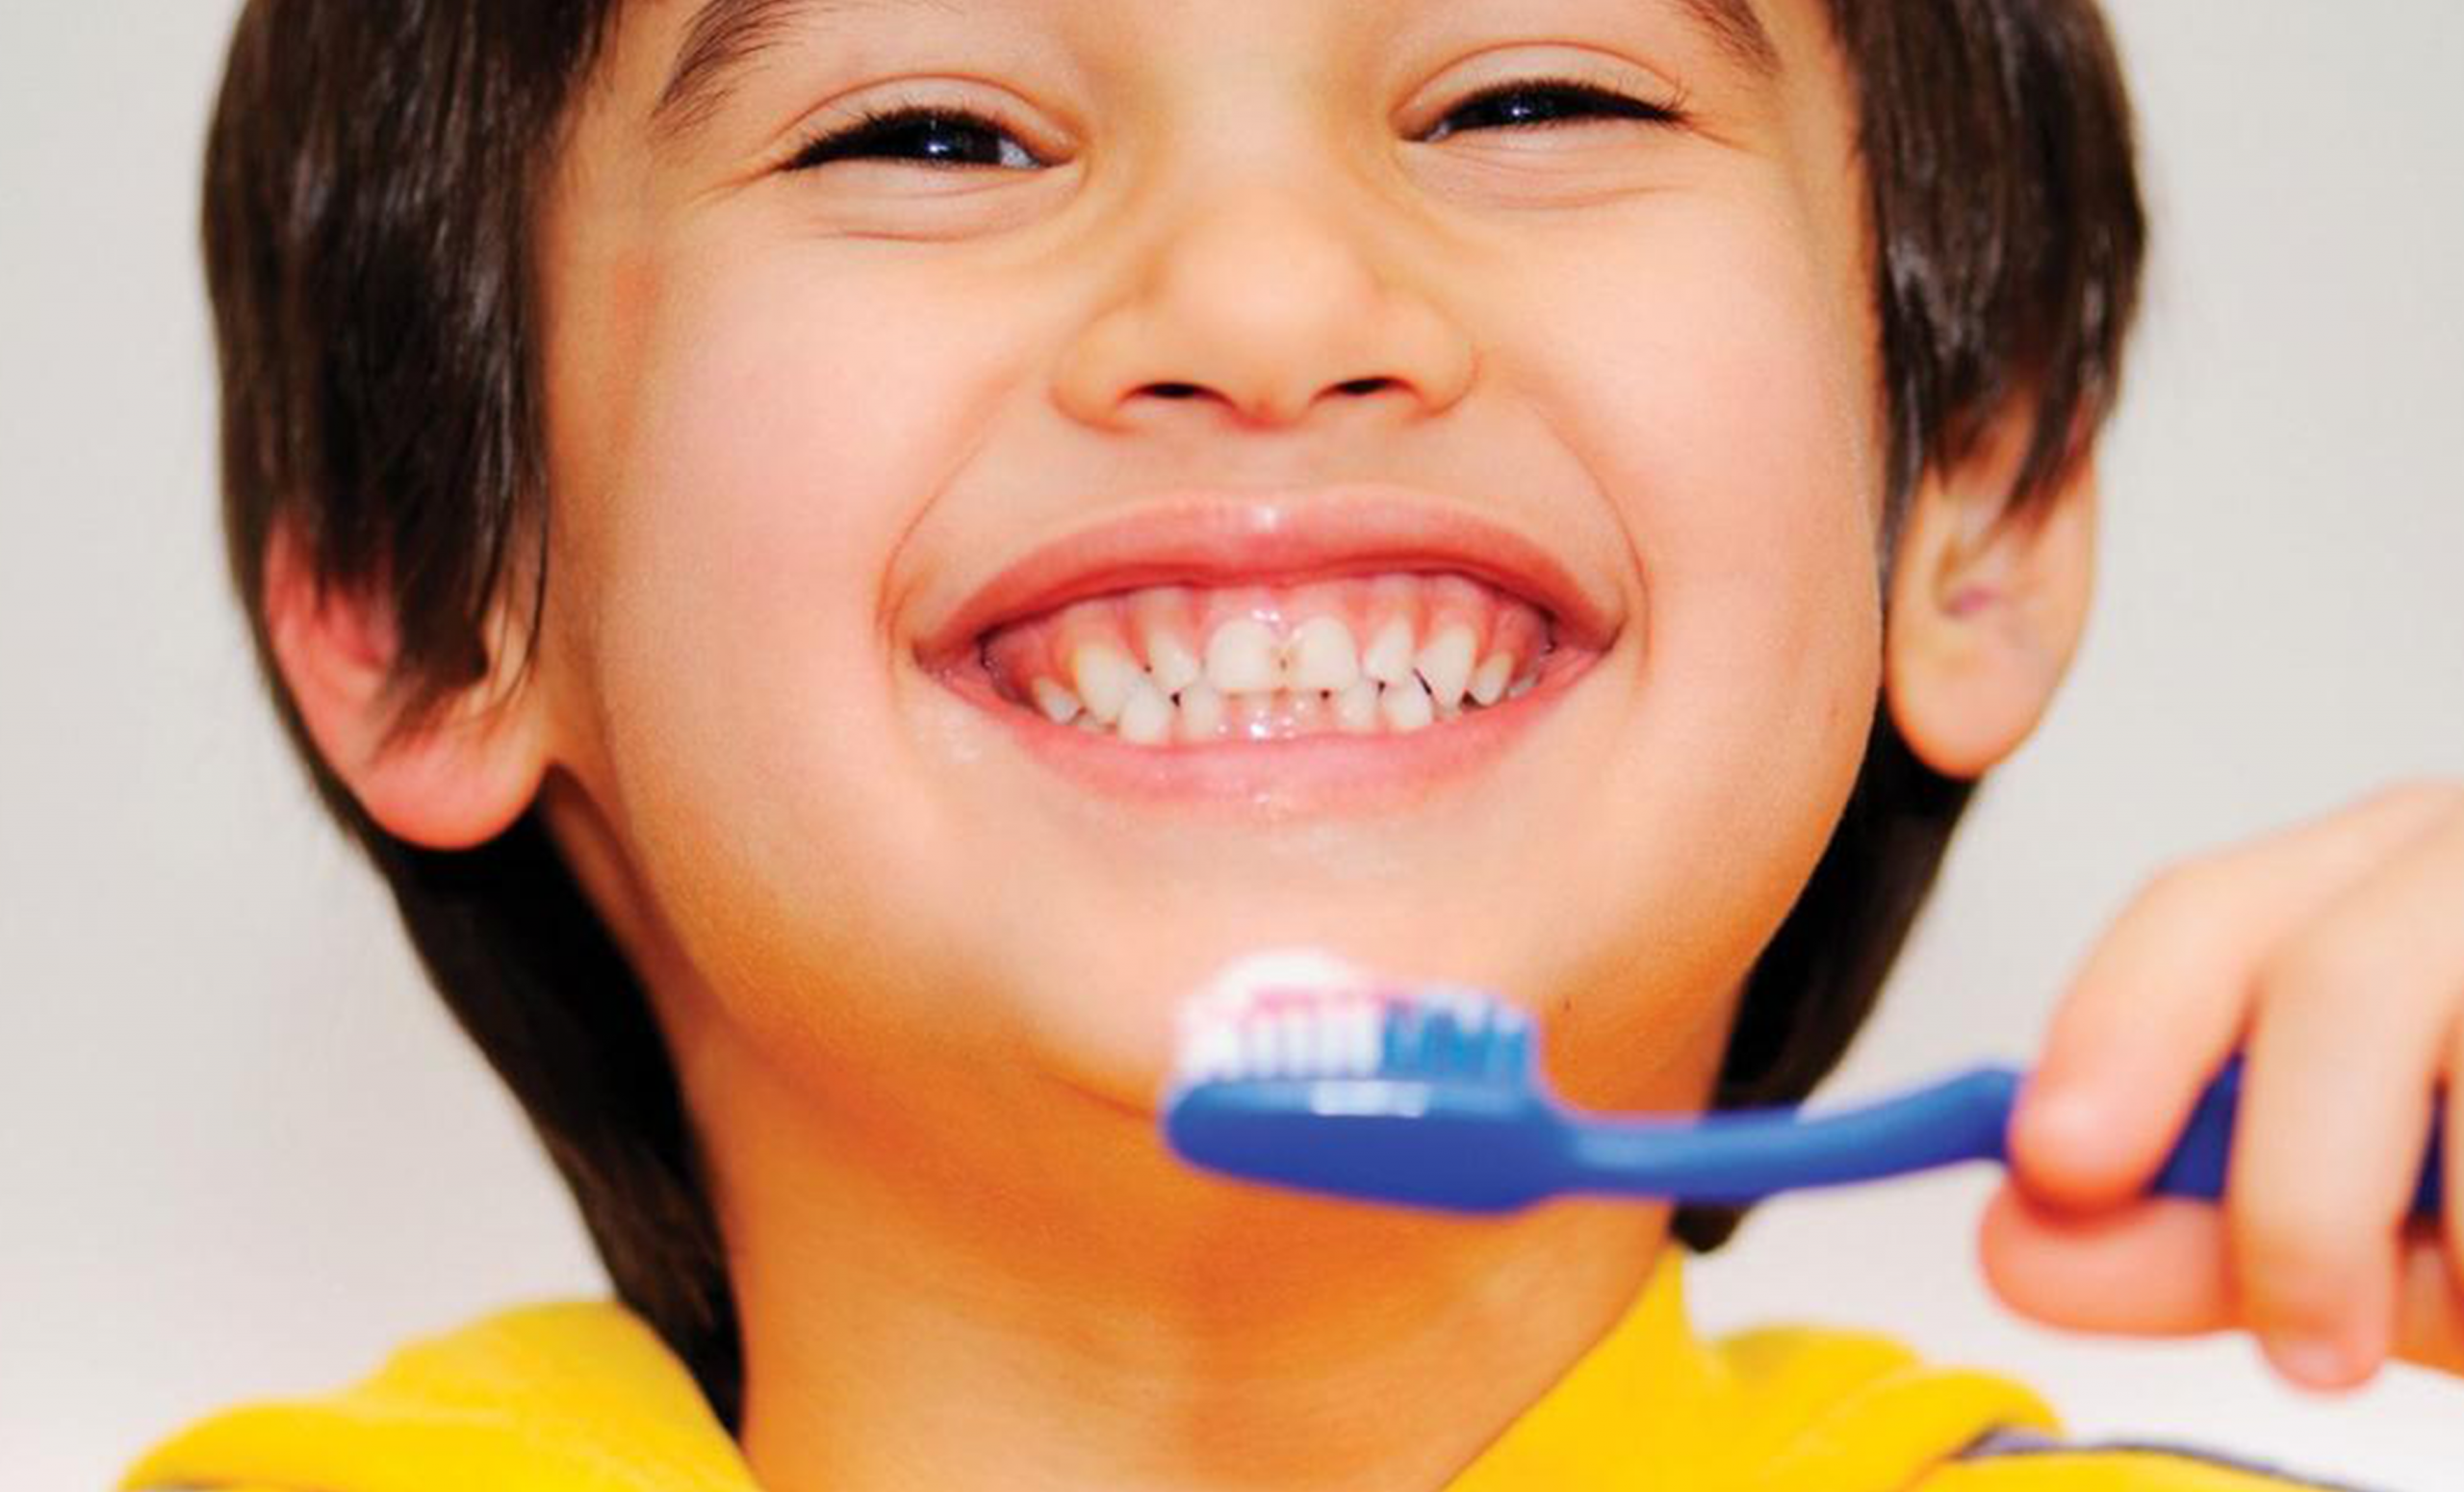 Ask Dr. Whitlock: How often should I replace my toothbrush?